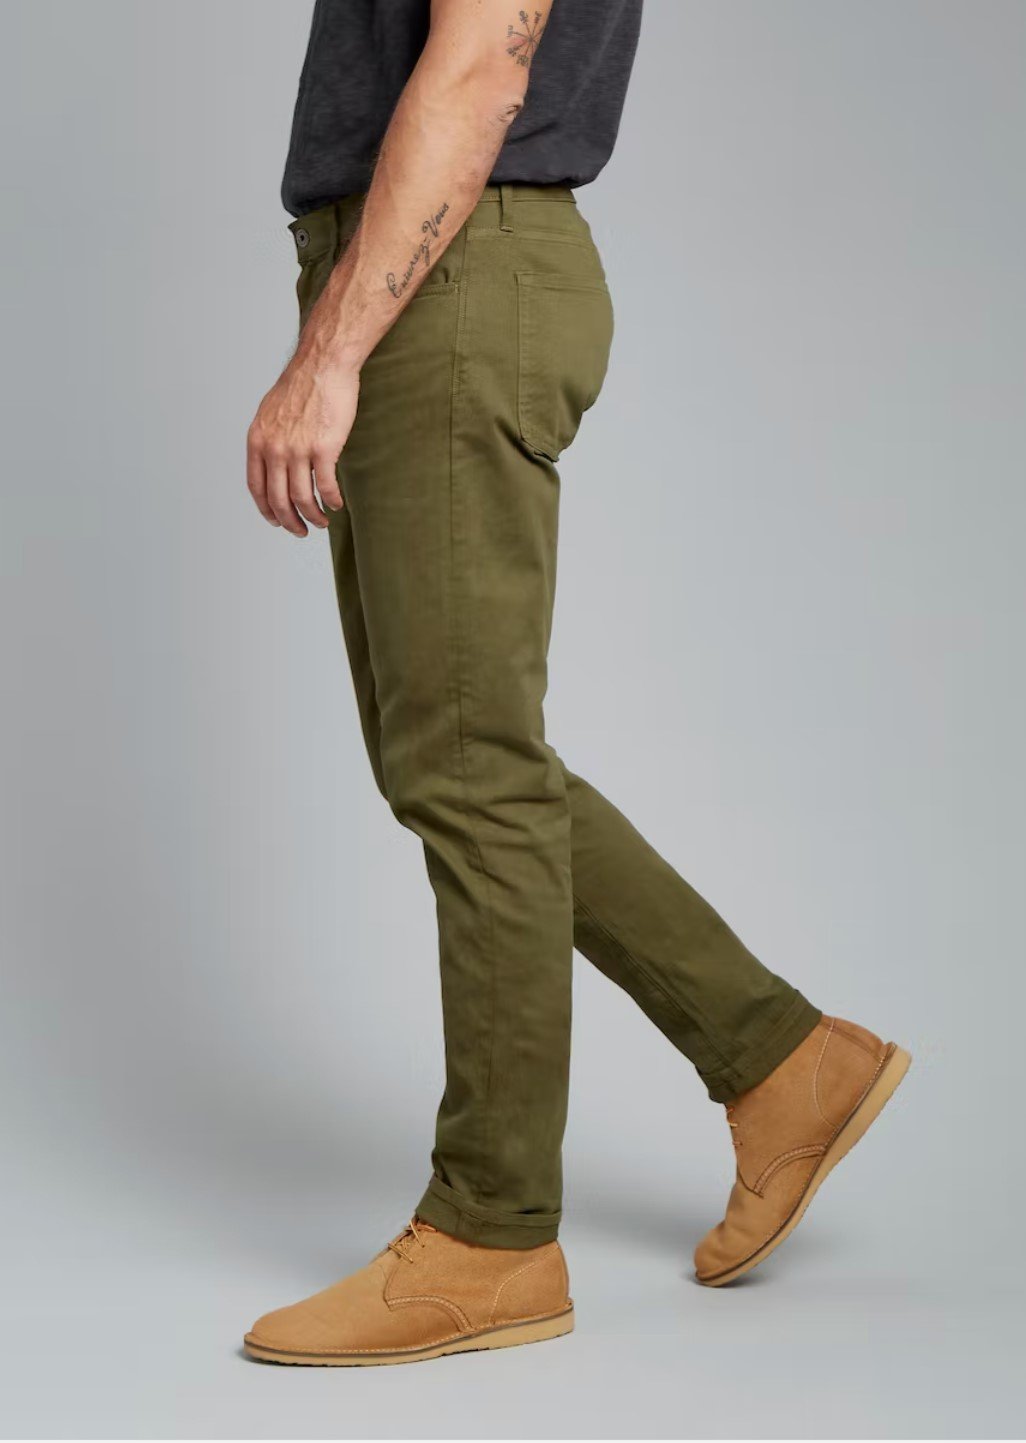 Flint and Tinder 365 Slim Pants in Olive — CARY LANE